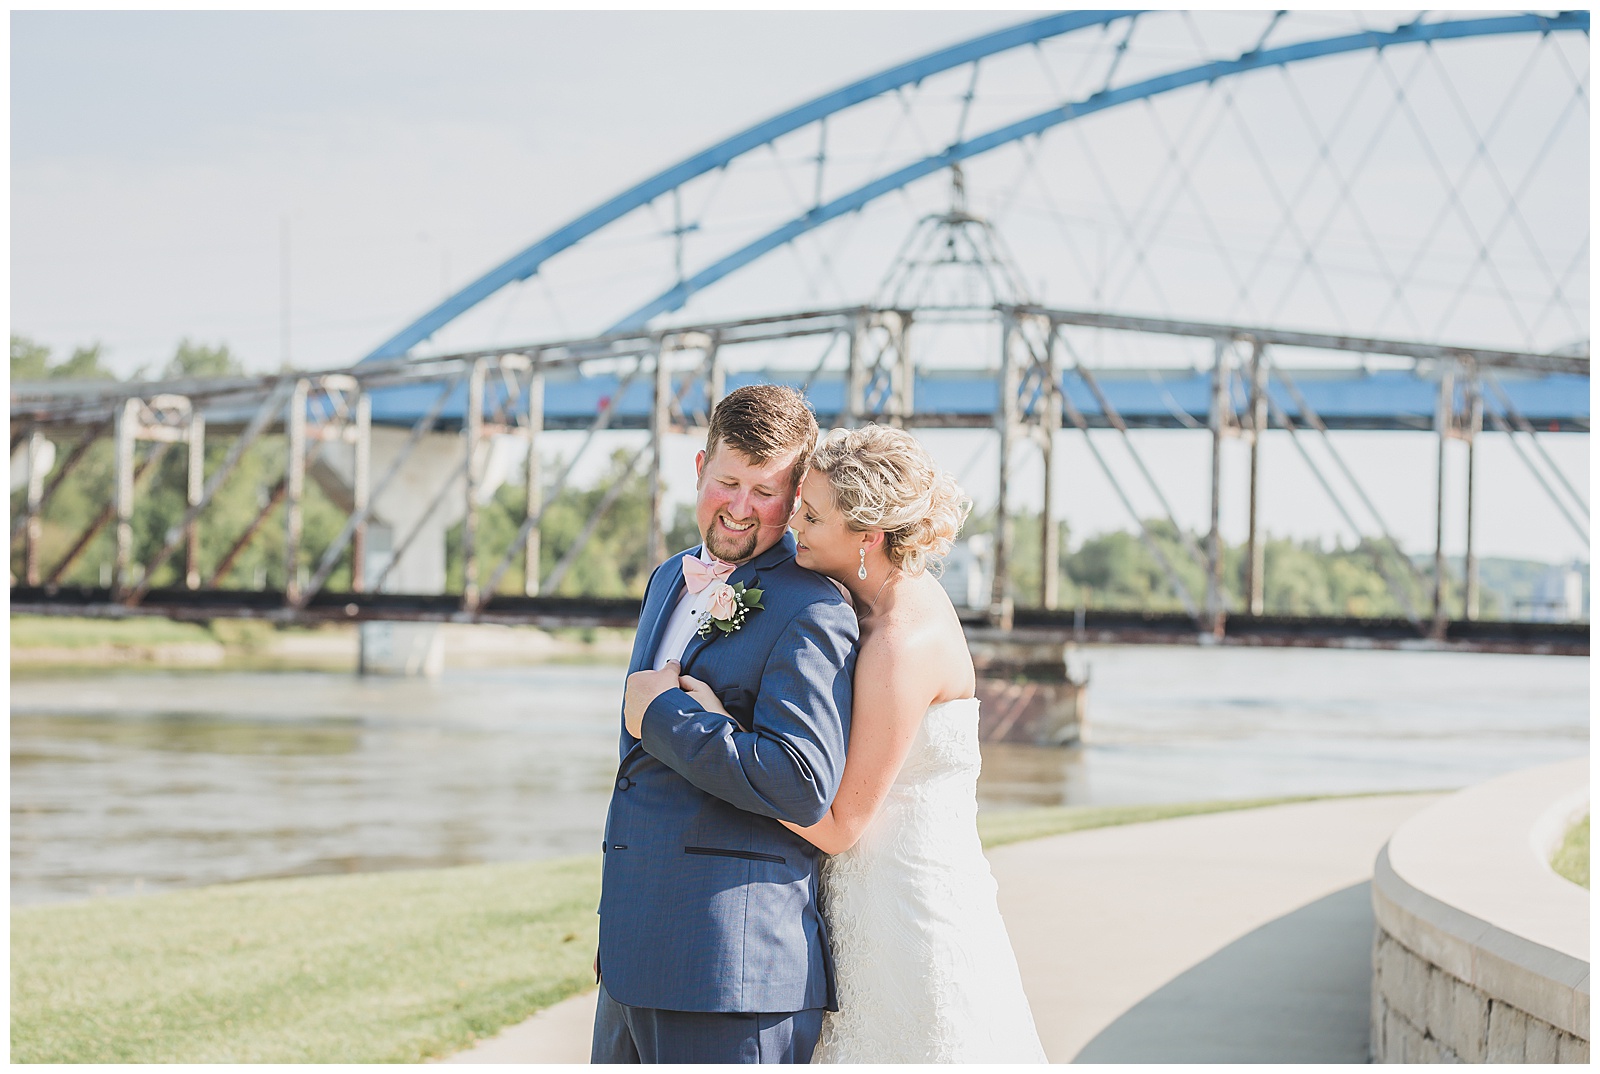 Wedding photography in Atchison, Kansas, by Kansas City wedding photographers Wisdom-Watson Weddings.